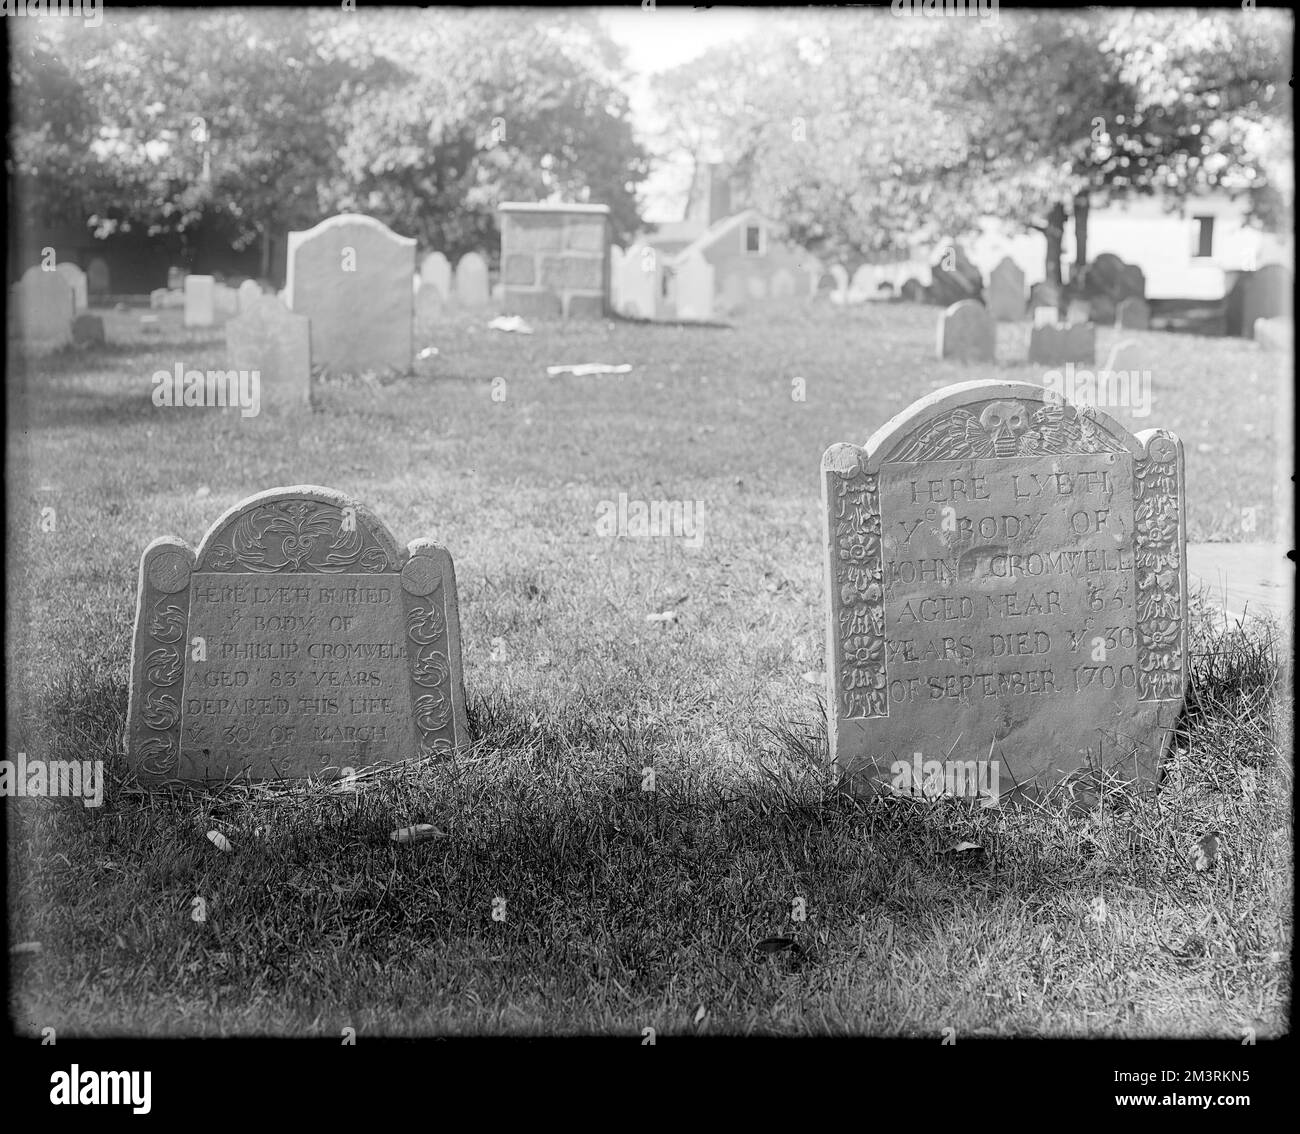 Salem, Charter Street, monuments, gravestone, Phillip and John Cromwell , Cemeteries, Tombs & sepulchral monuments. Frank Cousins Glass Plate Negatives Collection Stock Photo